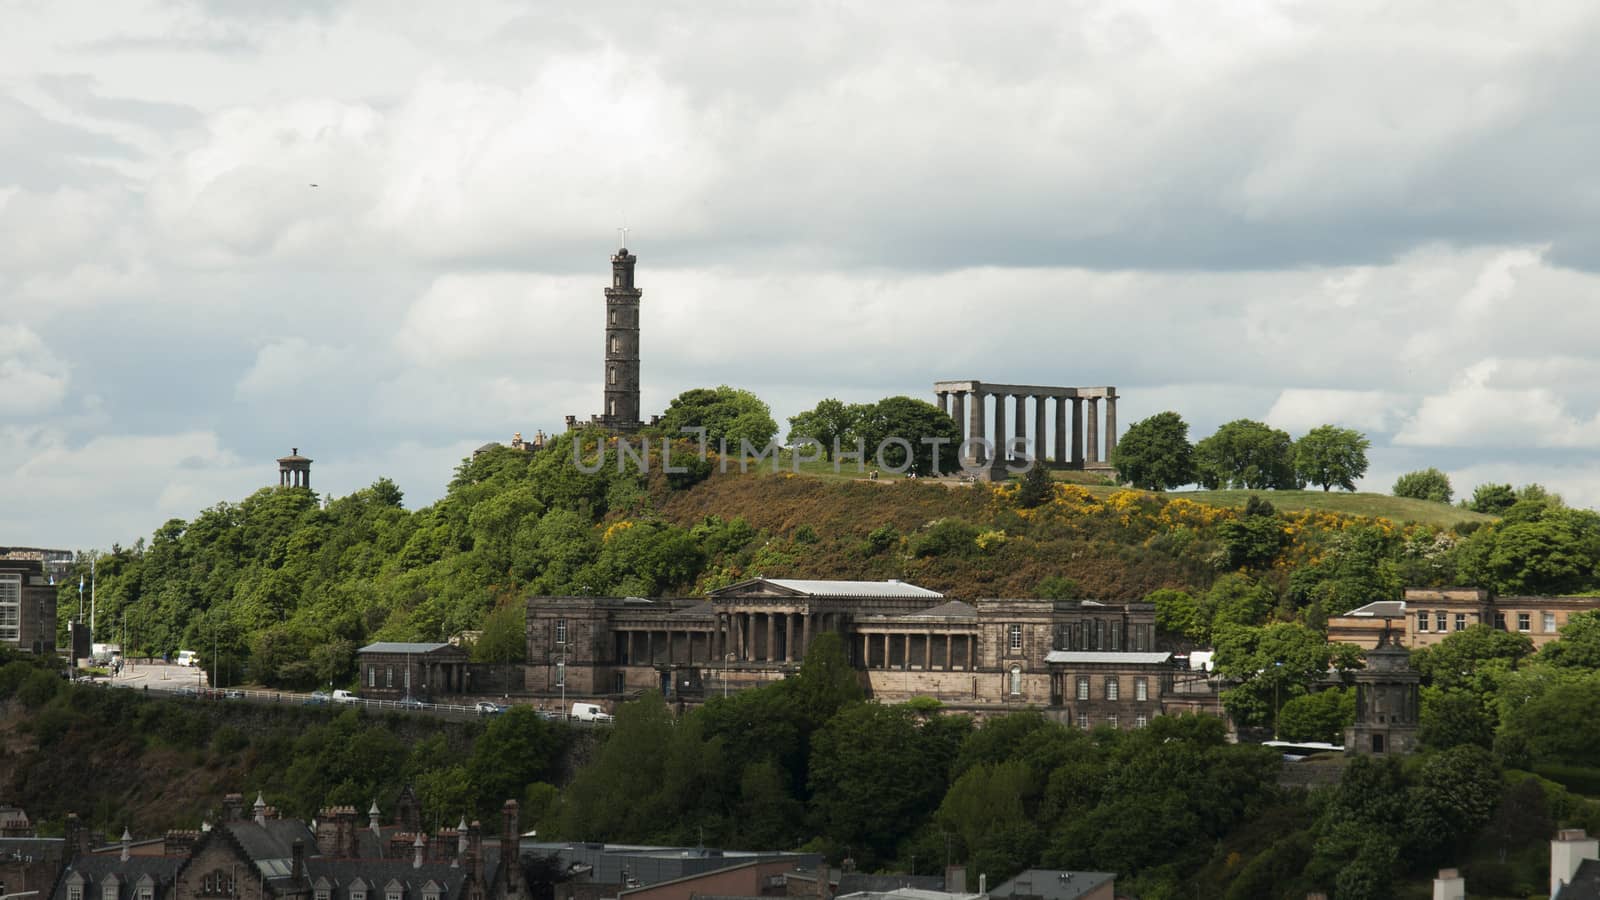 Calton Hill, is a hill in central Edinburgh, Scotland, just to the east of Princes Street and is included in the city's UNESCO World Heritage Site.